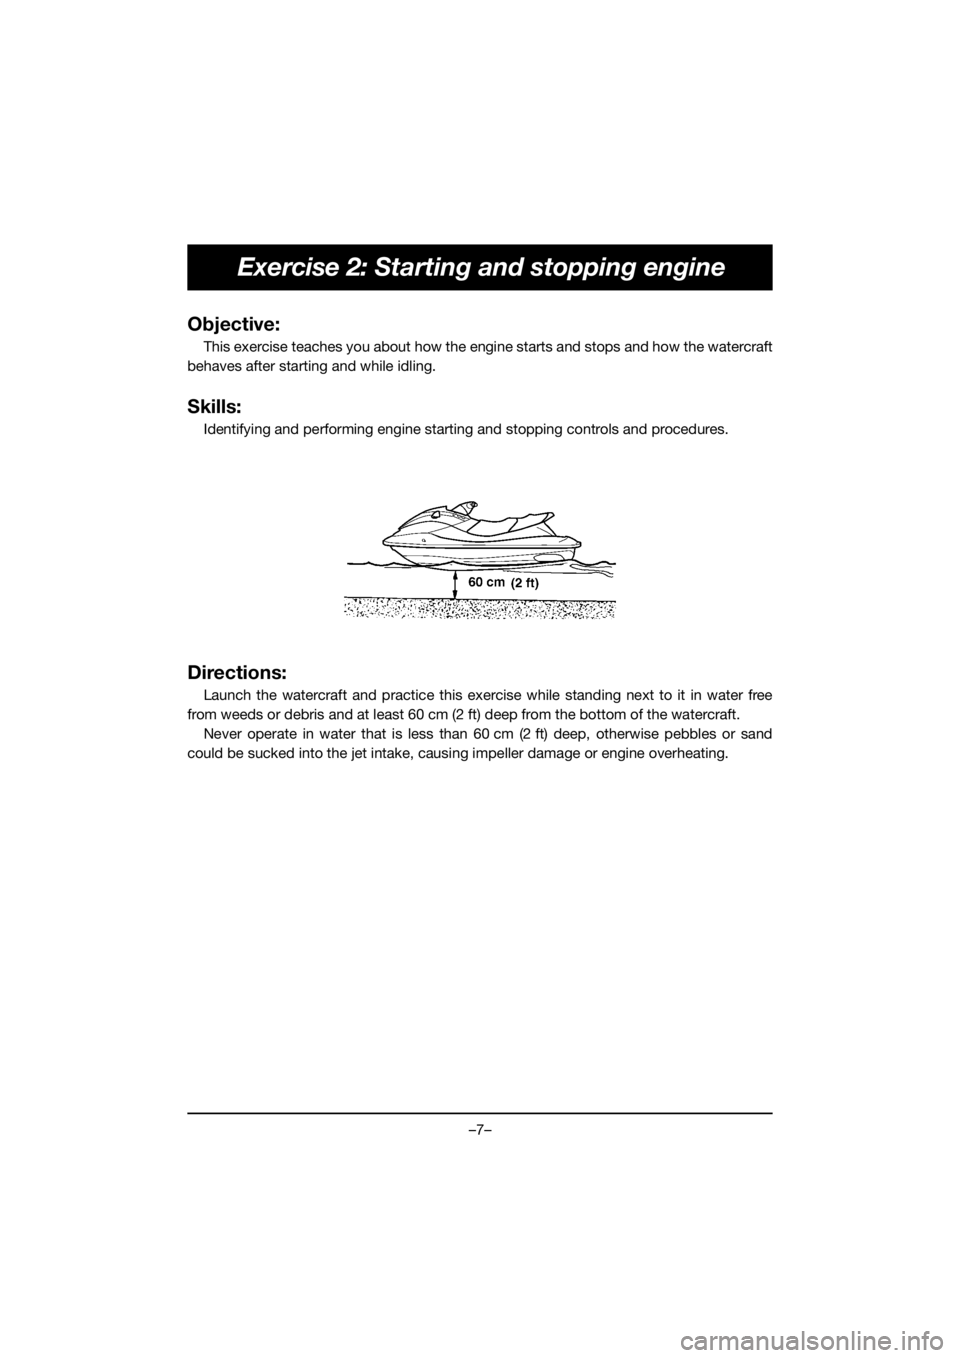 YAMAHA EX DELUXE 2020  Manuale duso (in Italian) –7–
Exercise 2: Starting and stopping engine
Objective:
This exercise teaches you about how the engine starts and stops and how the watercraft
behaves after starting and while idling.
Skills:
Iden